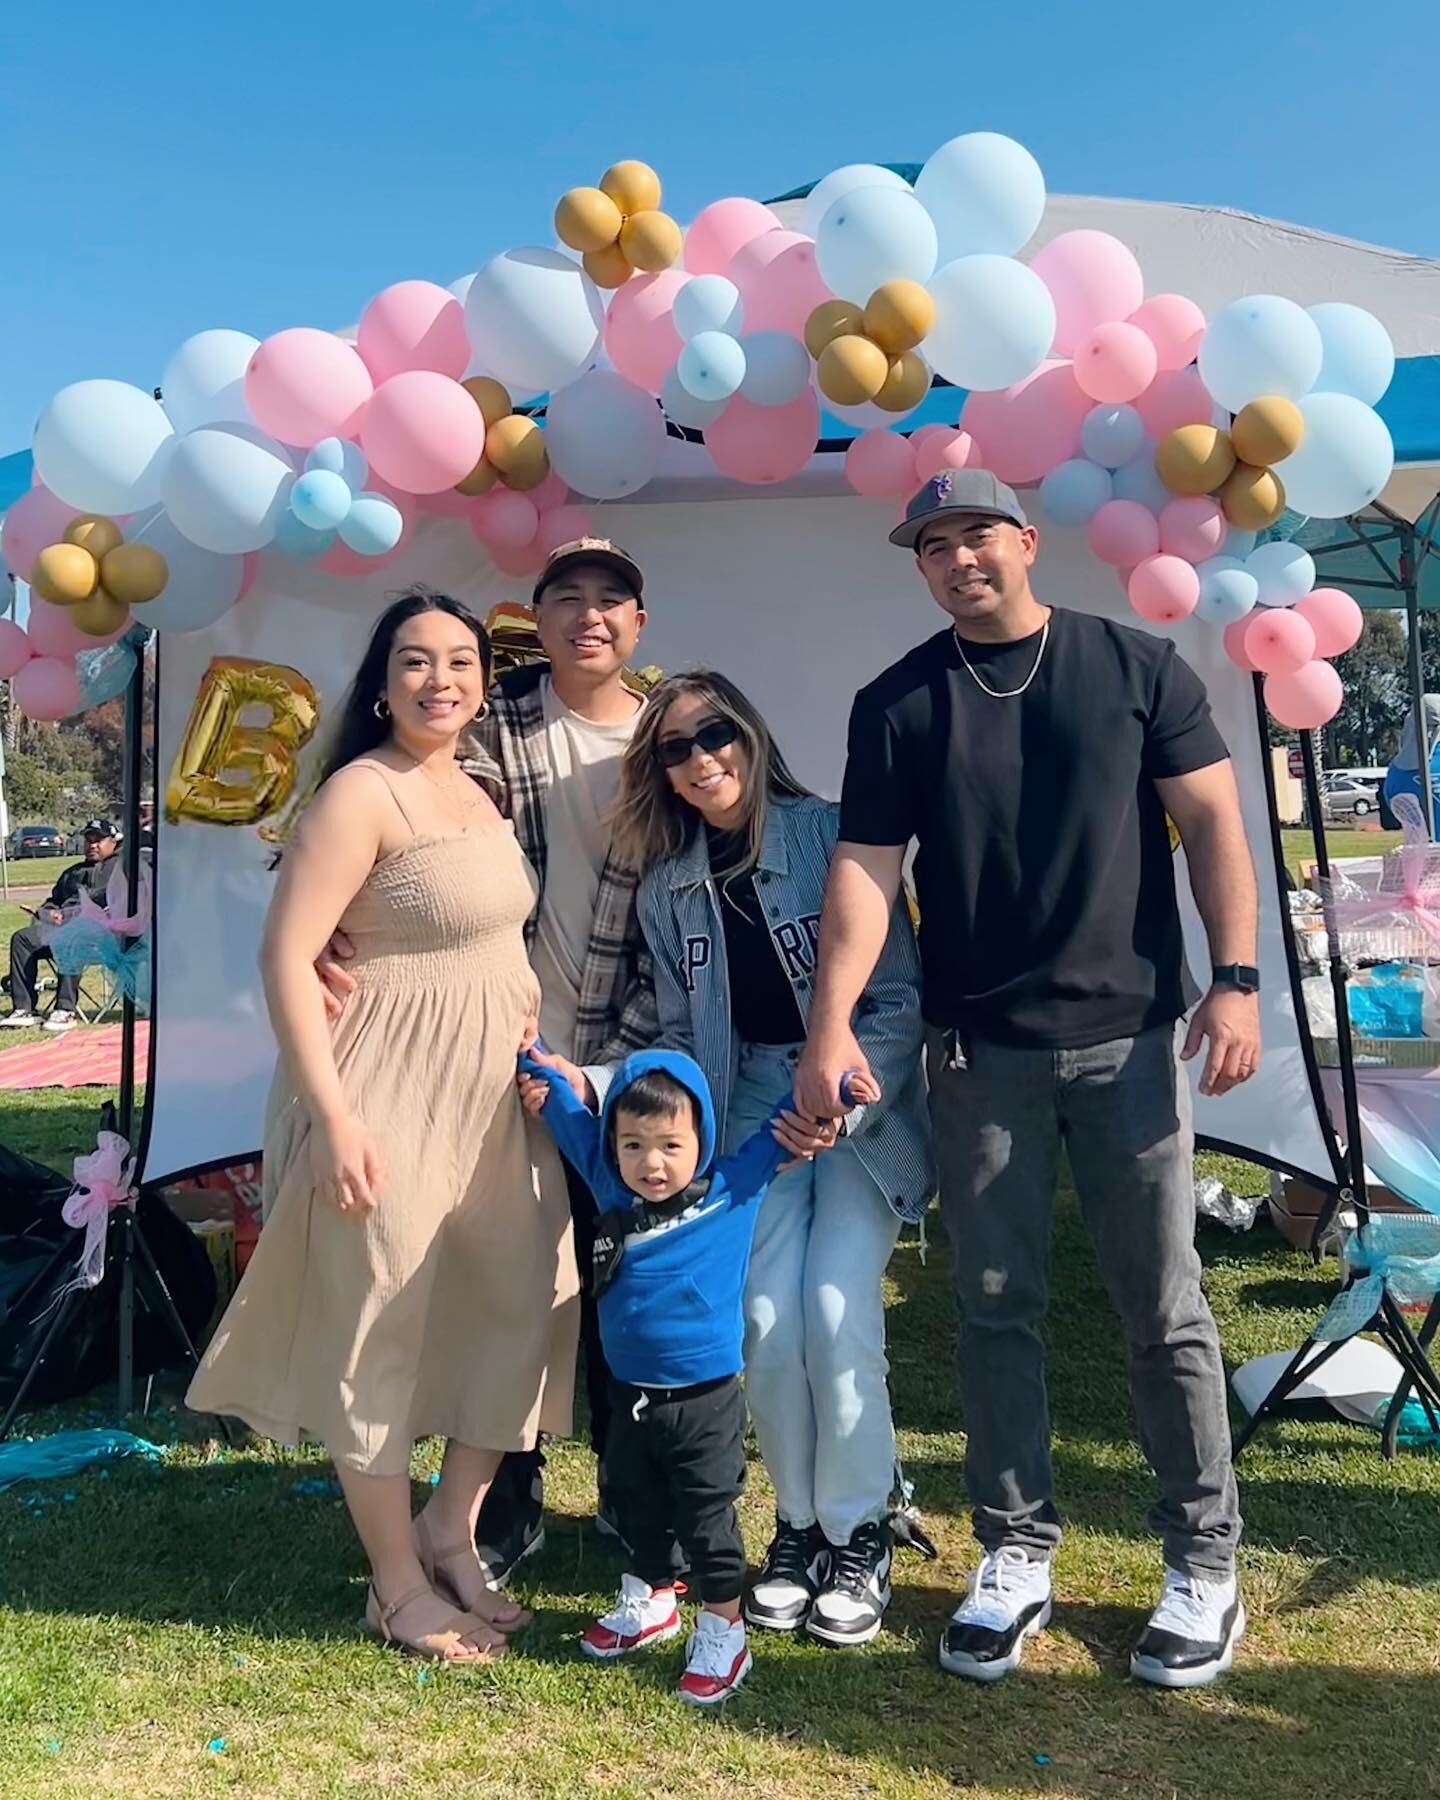 congrats to my little brother and sis on their baby boy! v much looking forward to raising our BOYS together!! first family trip: Coachella 2024 lol  #ganggang